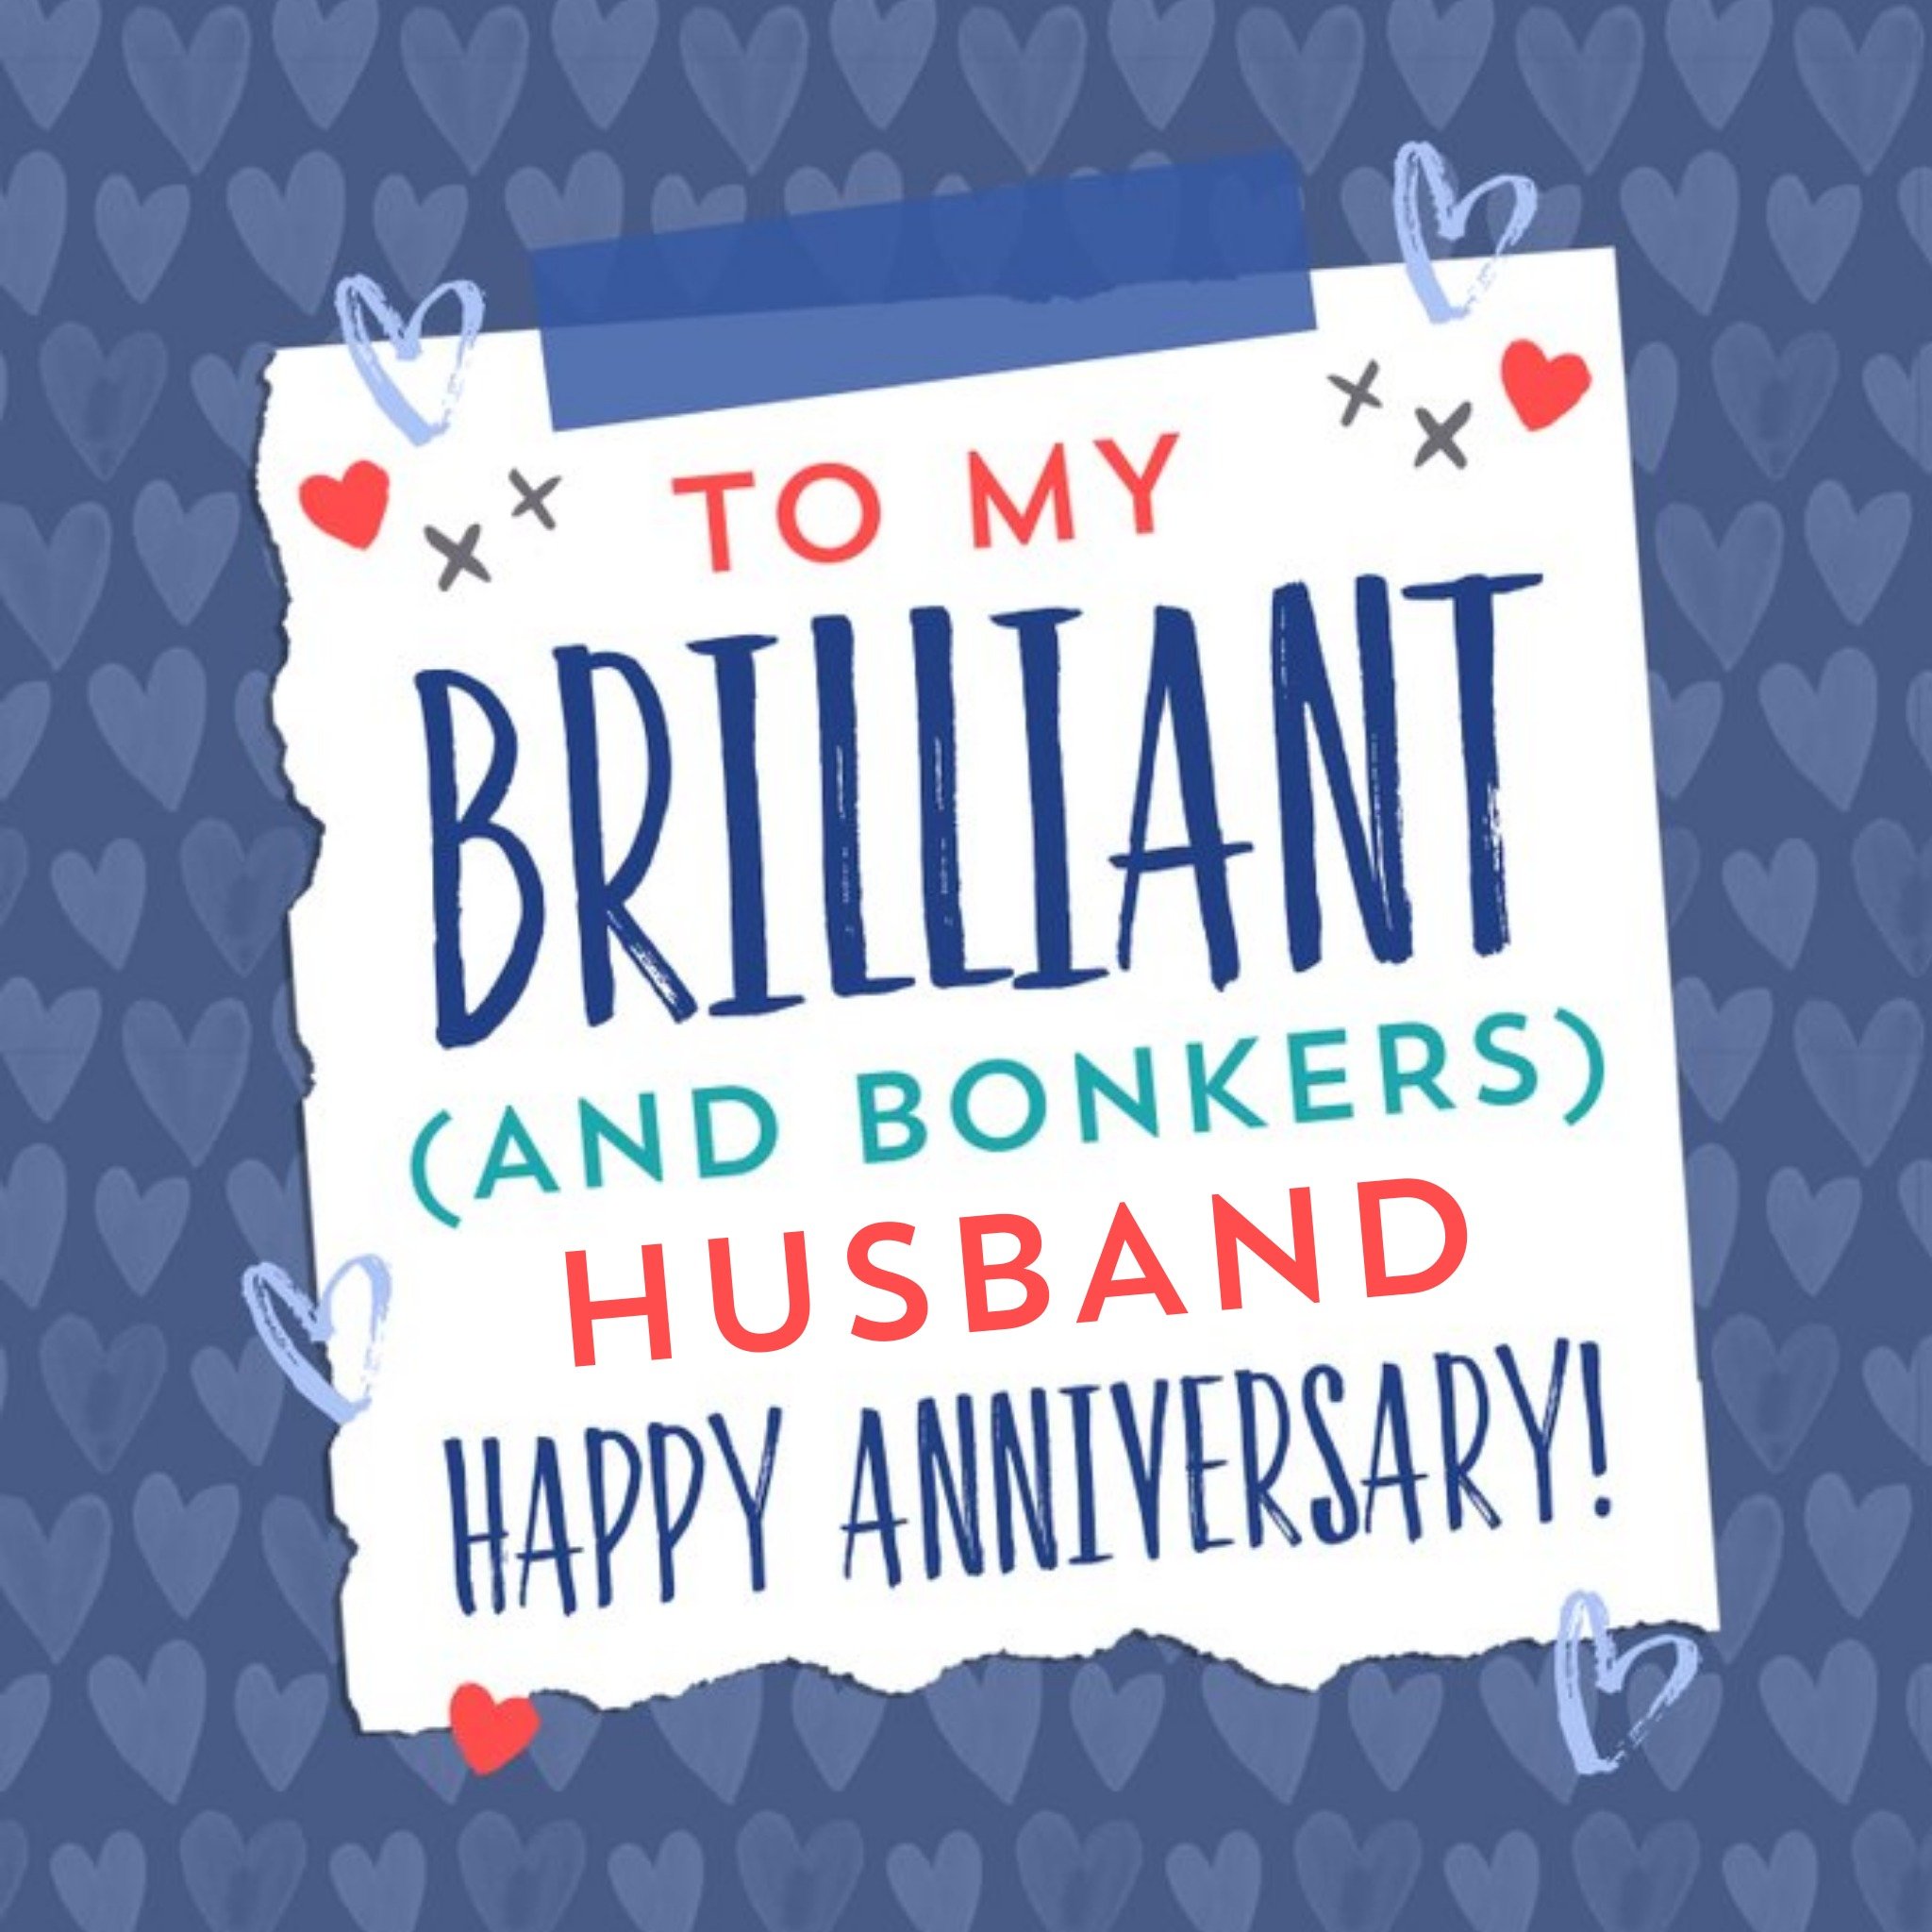 Moonpig To My Brilliant And Bonkers Husband Happy Anniversary Card, Square